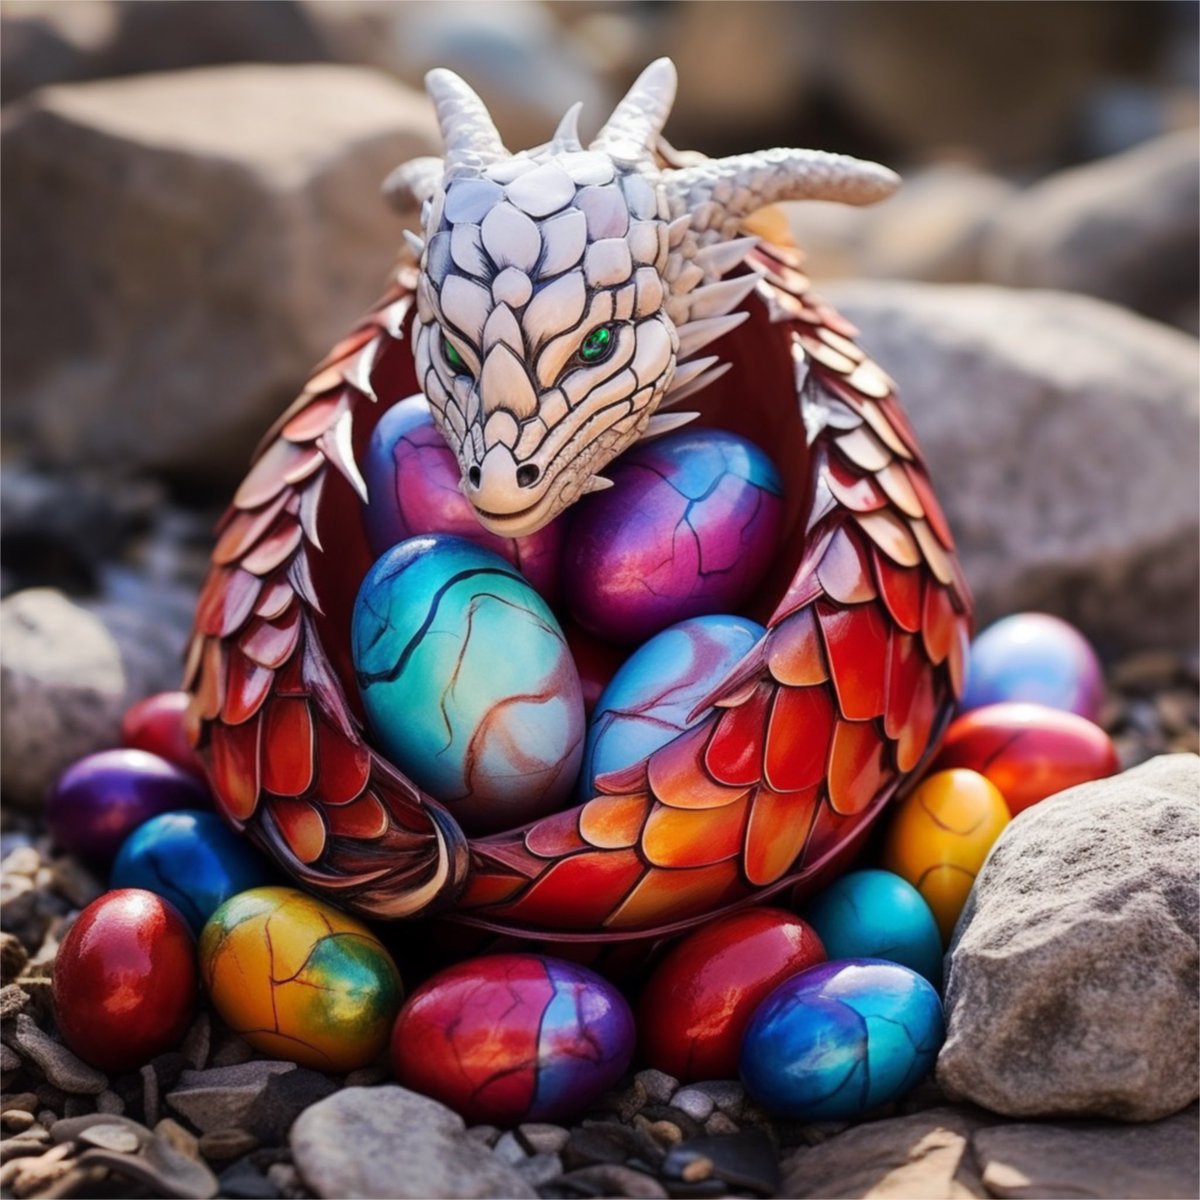 🐲🥚Today’s Giveaway 🥚🐲

Fantasy Dragon 7 and 10. 

Drop your wallet 
Follow me, Like, RP & tag friends would be cool. 
24Hrs 

Good Luck y’all and Thank you for participating! 🐲🥚🐲

#nft #NFTGiveaway #Loopring #L2 #NFTCommmunity